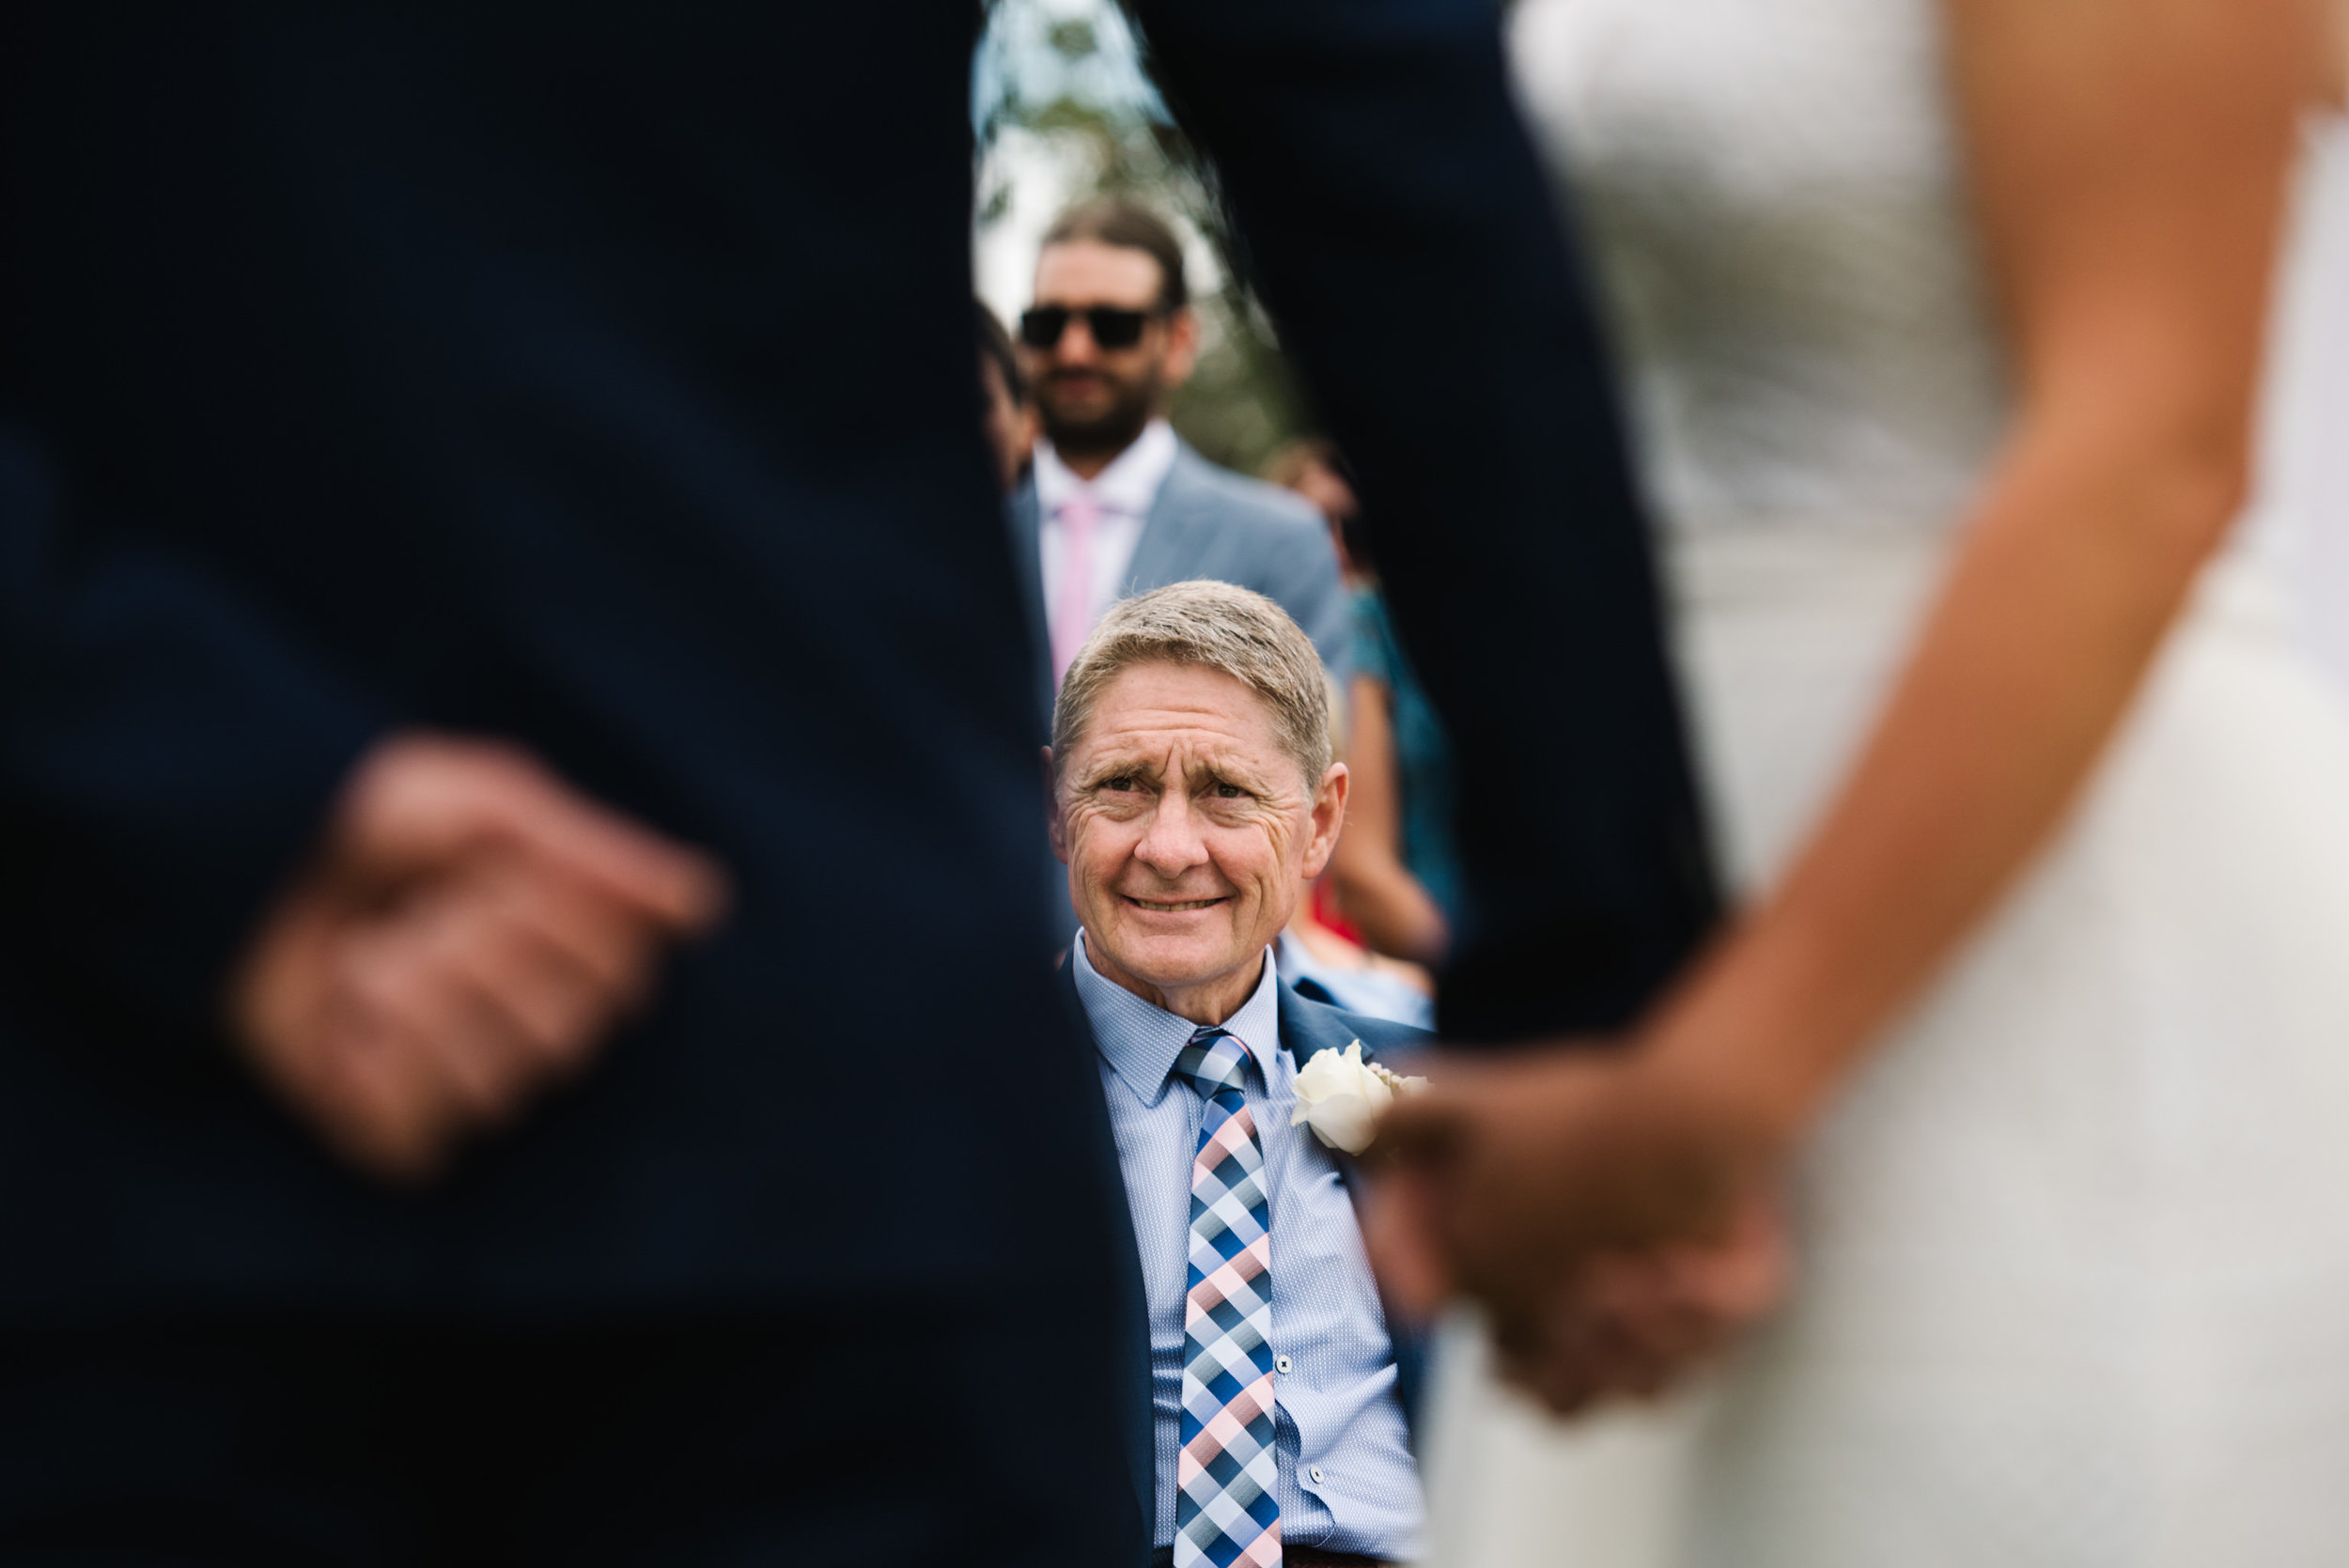 Father of the bride smiling during ceremony